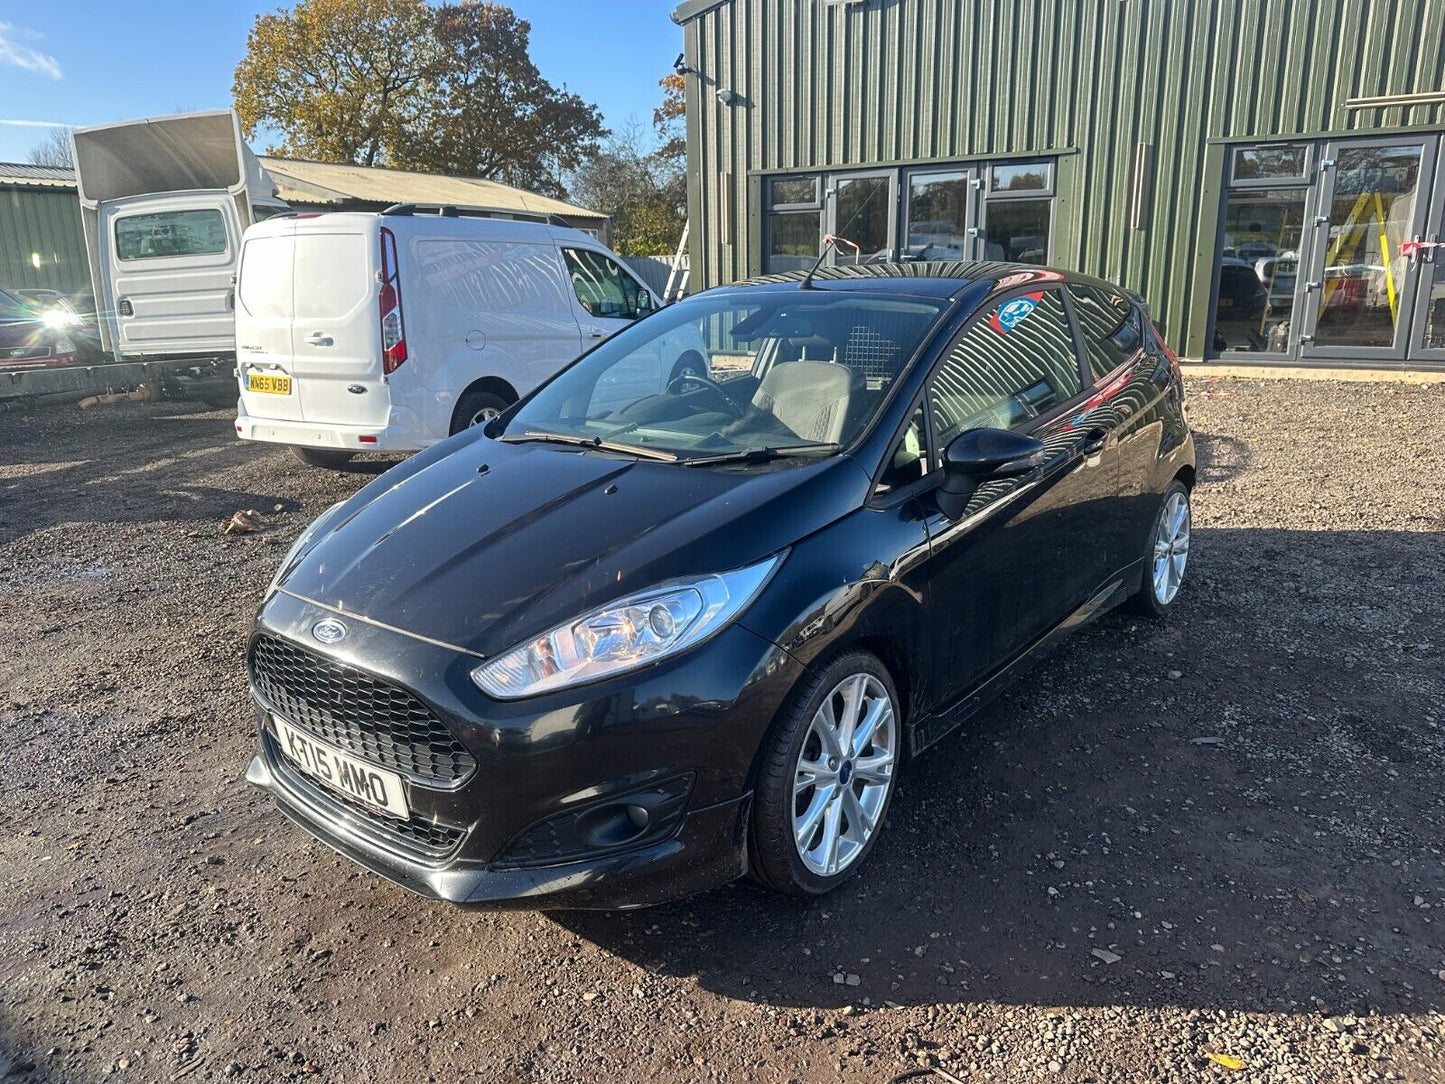 Bid on SLEEK BLACK FORD FIESTA VAN: RELIABLE WORKHORSE- Buy &amp; Sell on Auction with EAMA Group